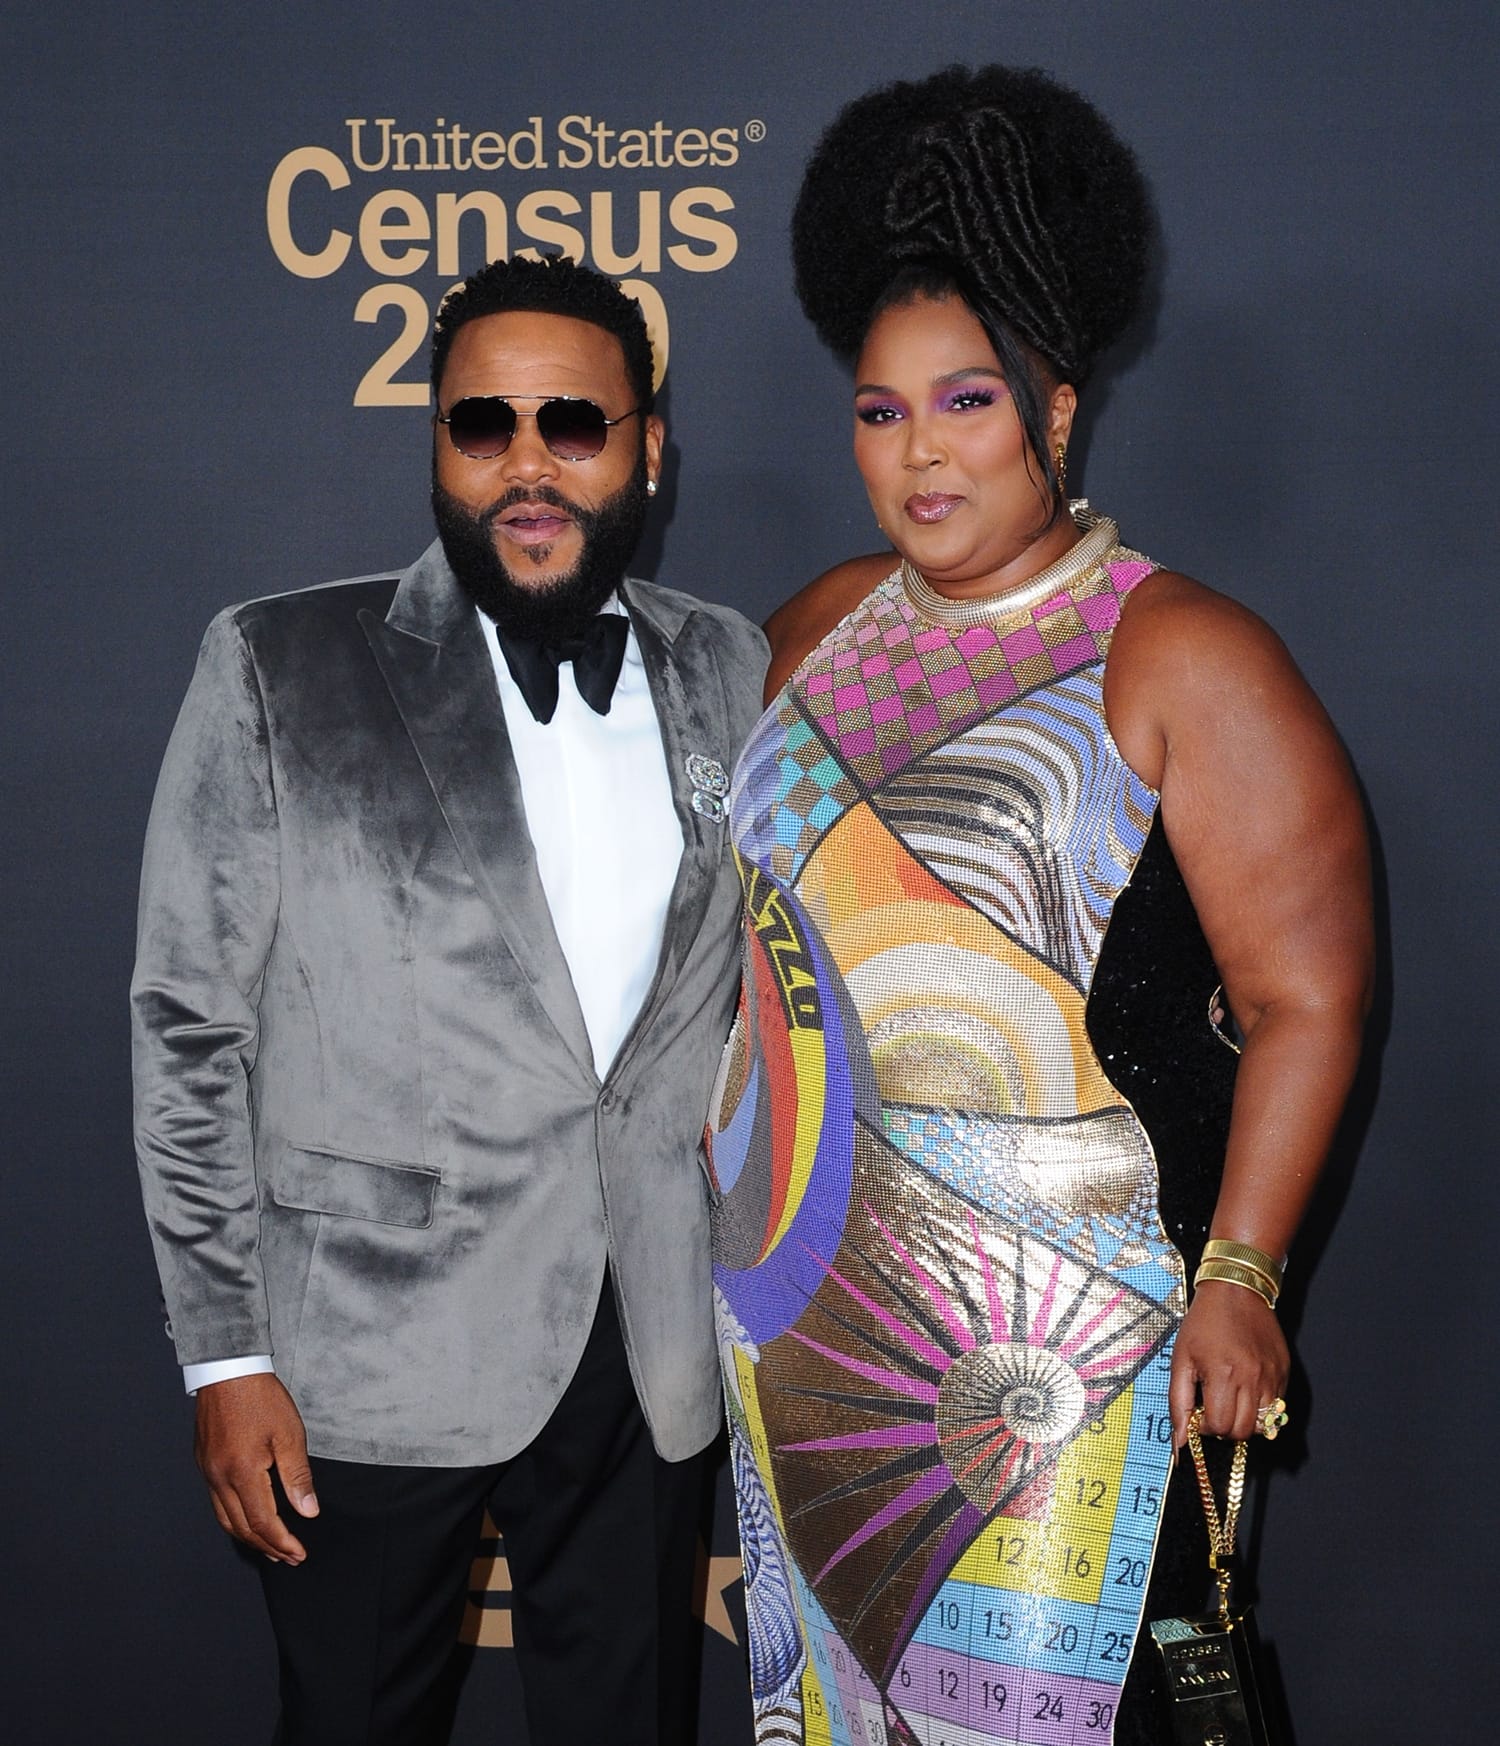 Lizzo, in a custom Mary Katrantzou geometric dress, posing with Anthony Anderson at the 51st NAACP Image Awards